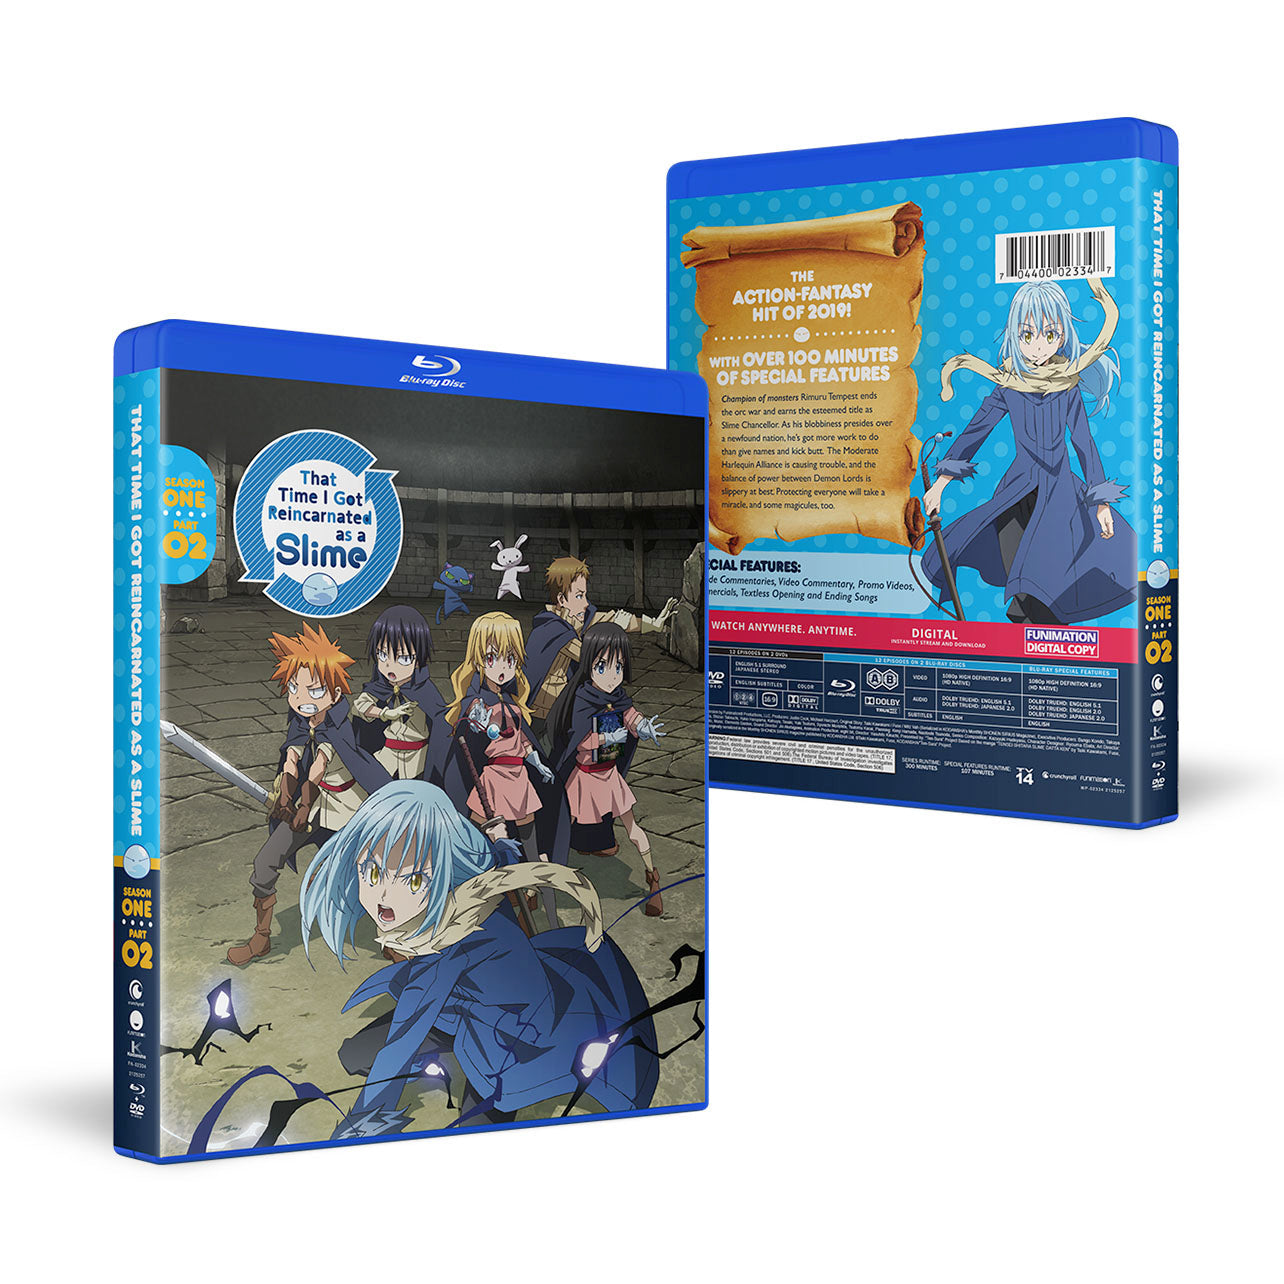 That Time I Got Reincarnated as a Slime - Season 1 Part 2 - Blu-ray + DVD image count 0